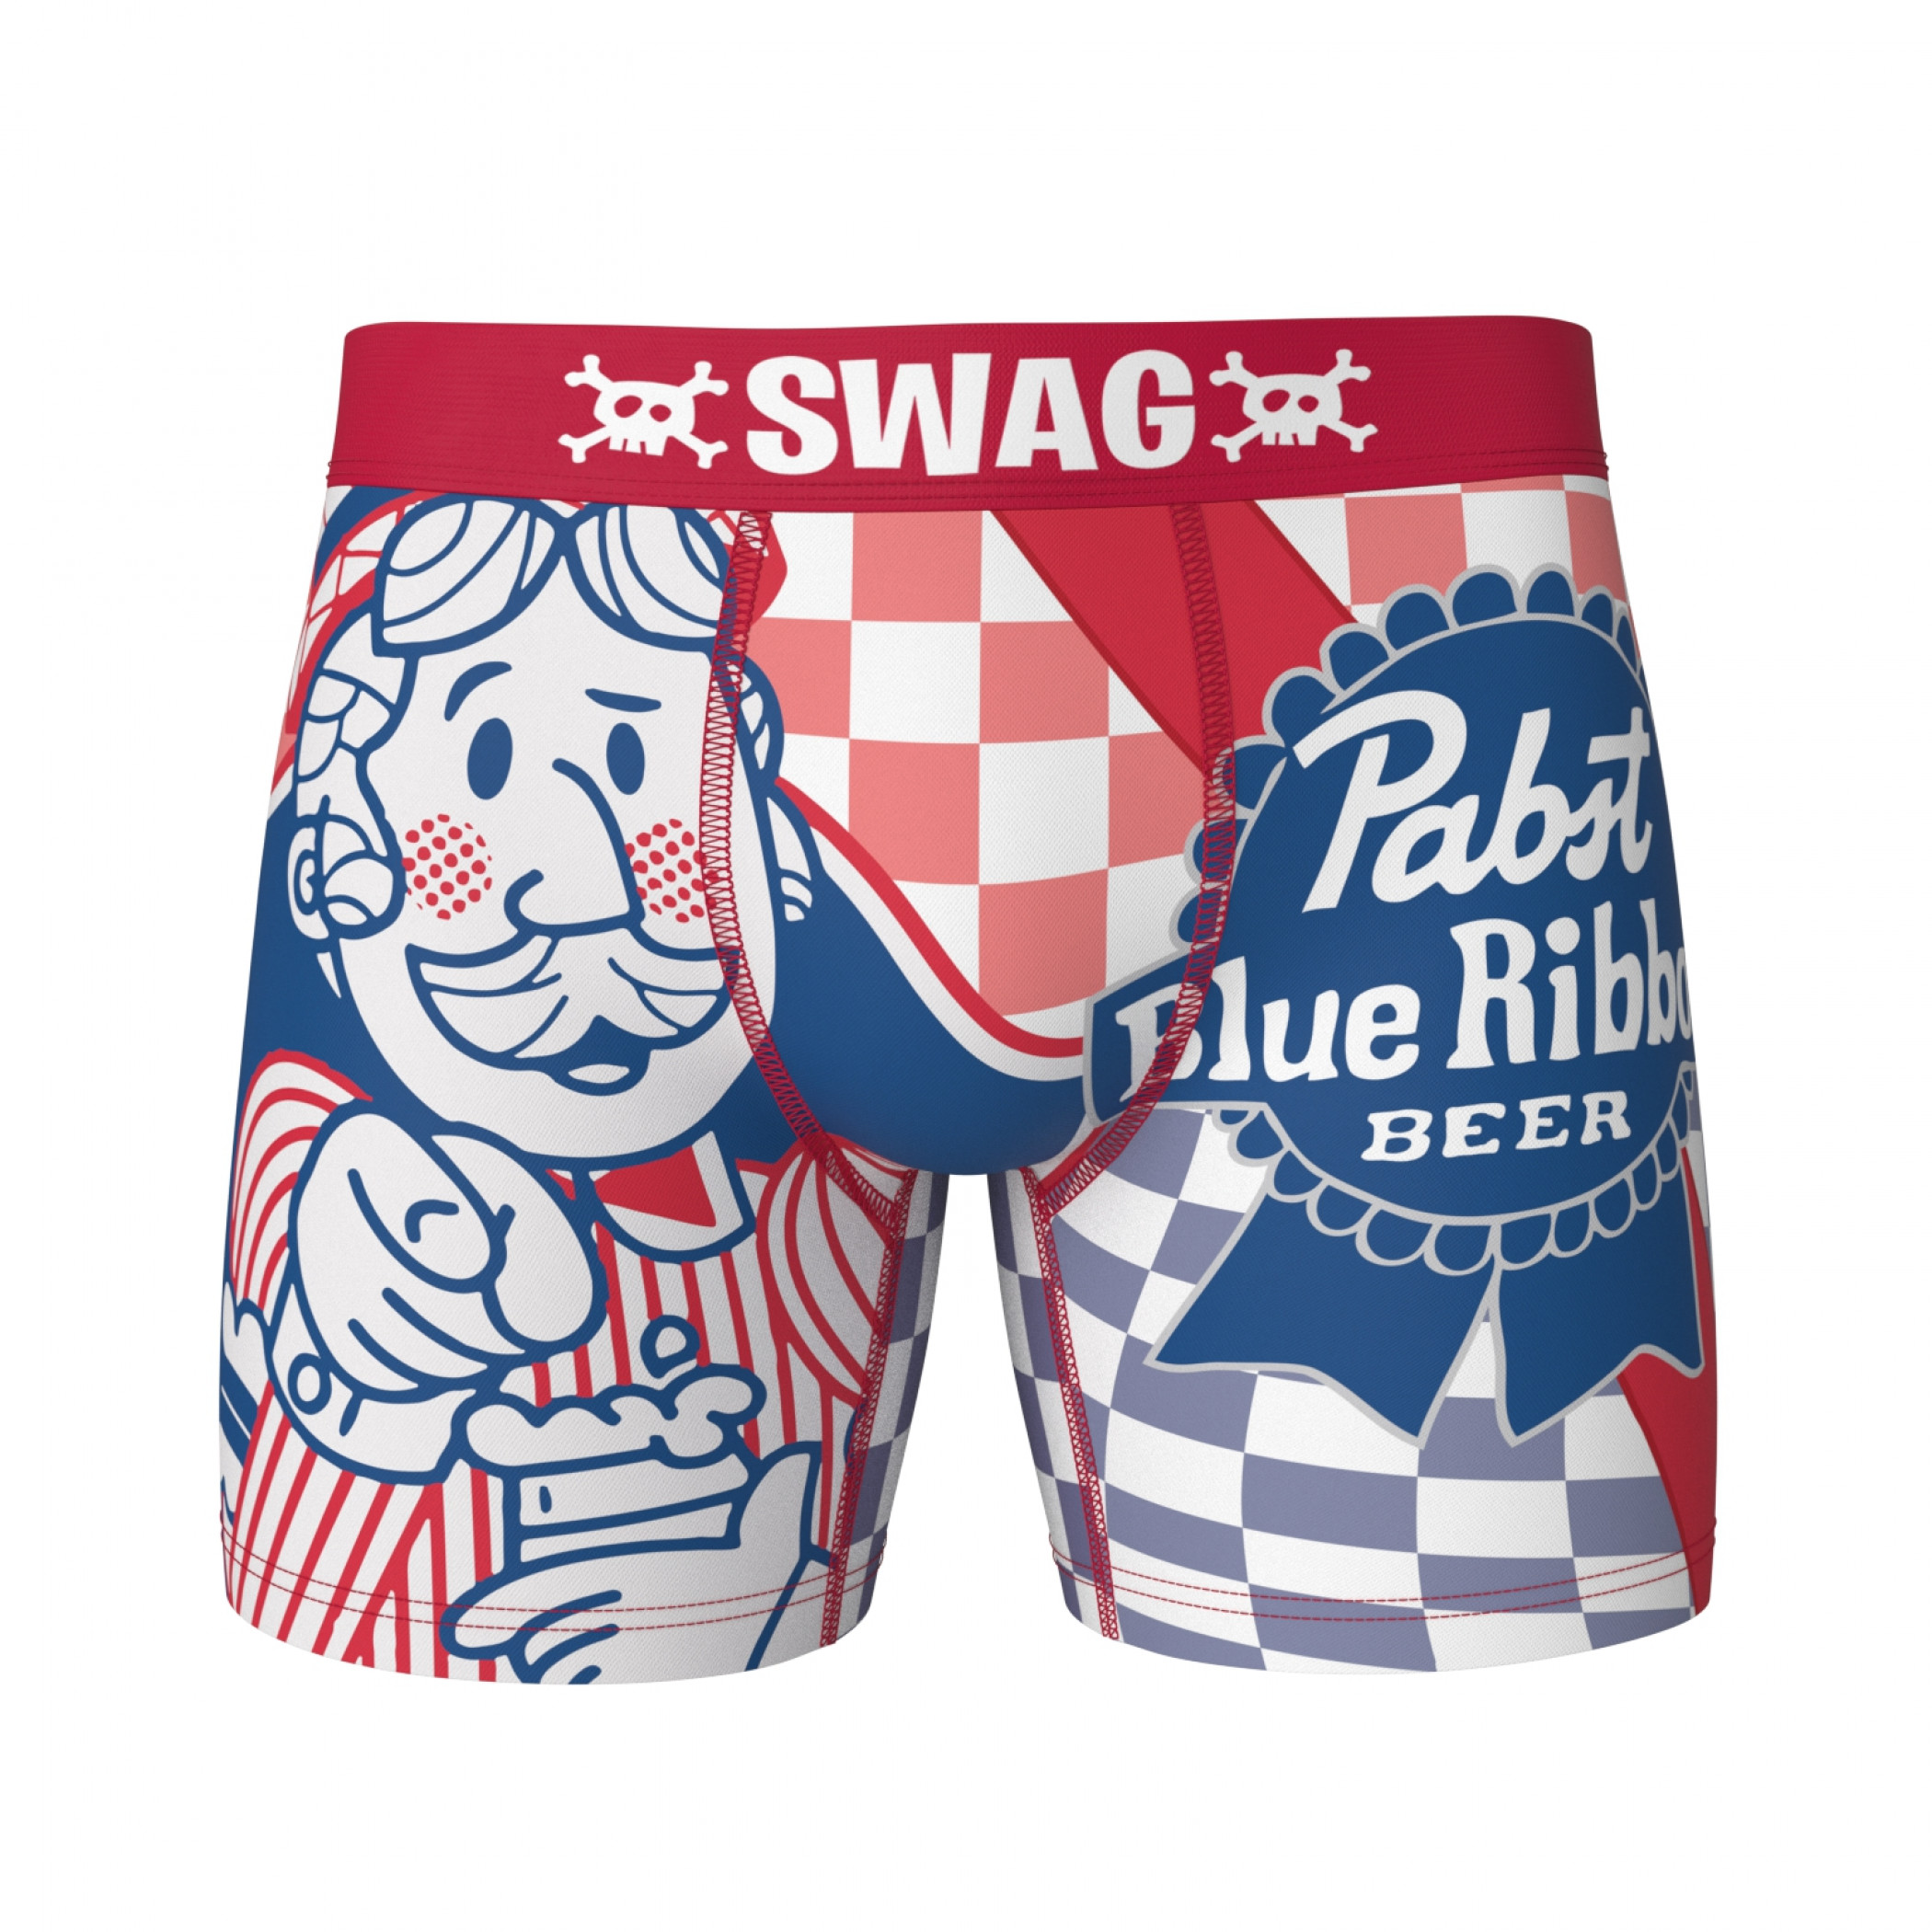 Pabst Blue Ribbon Beer Man Swag Boxer Briefs in a Can